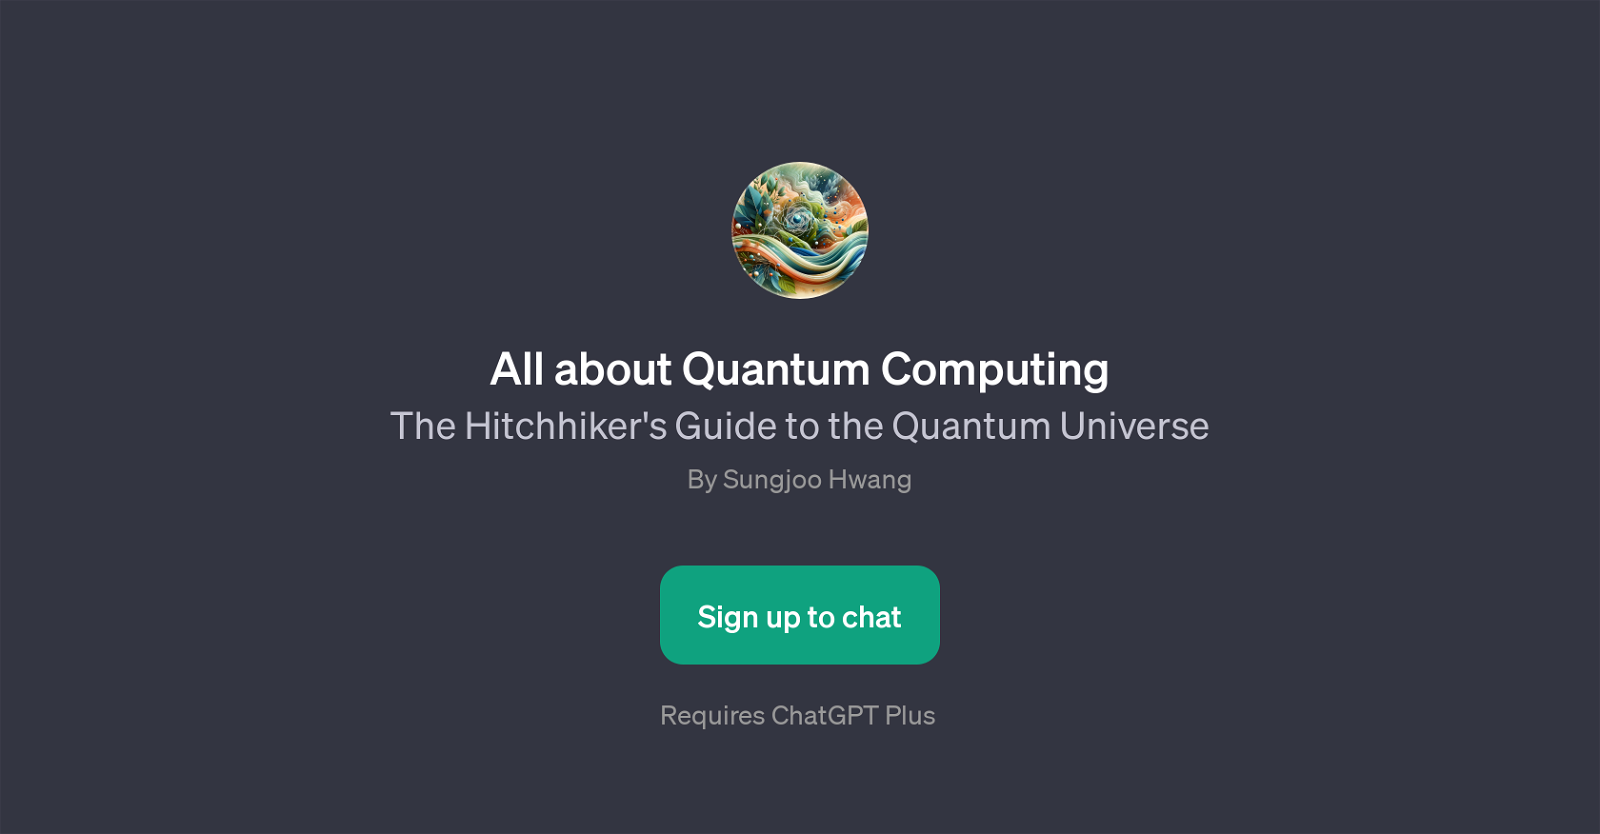 All about Quantum Computing website